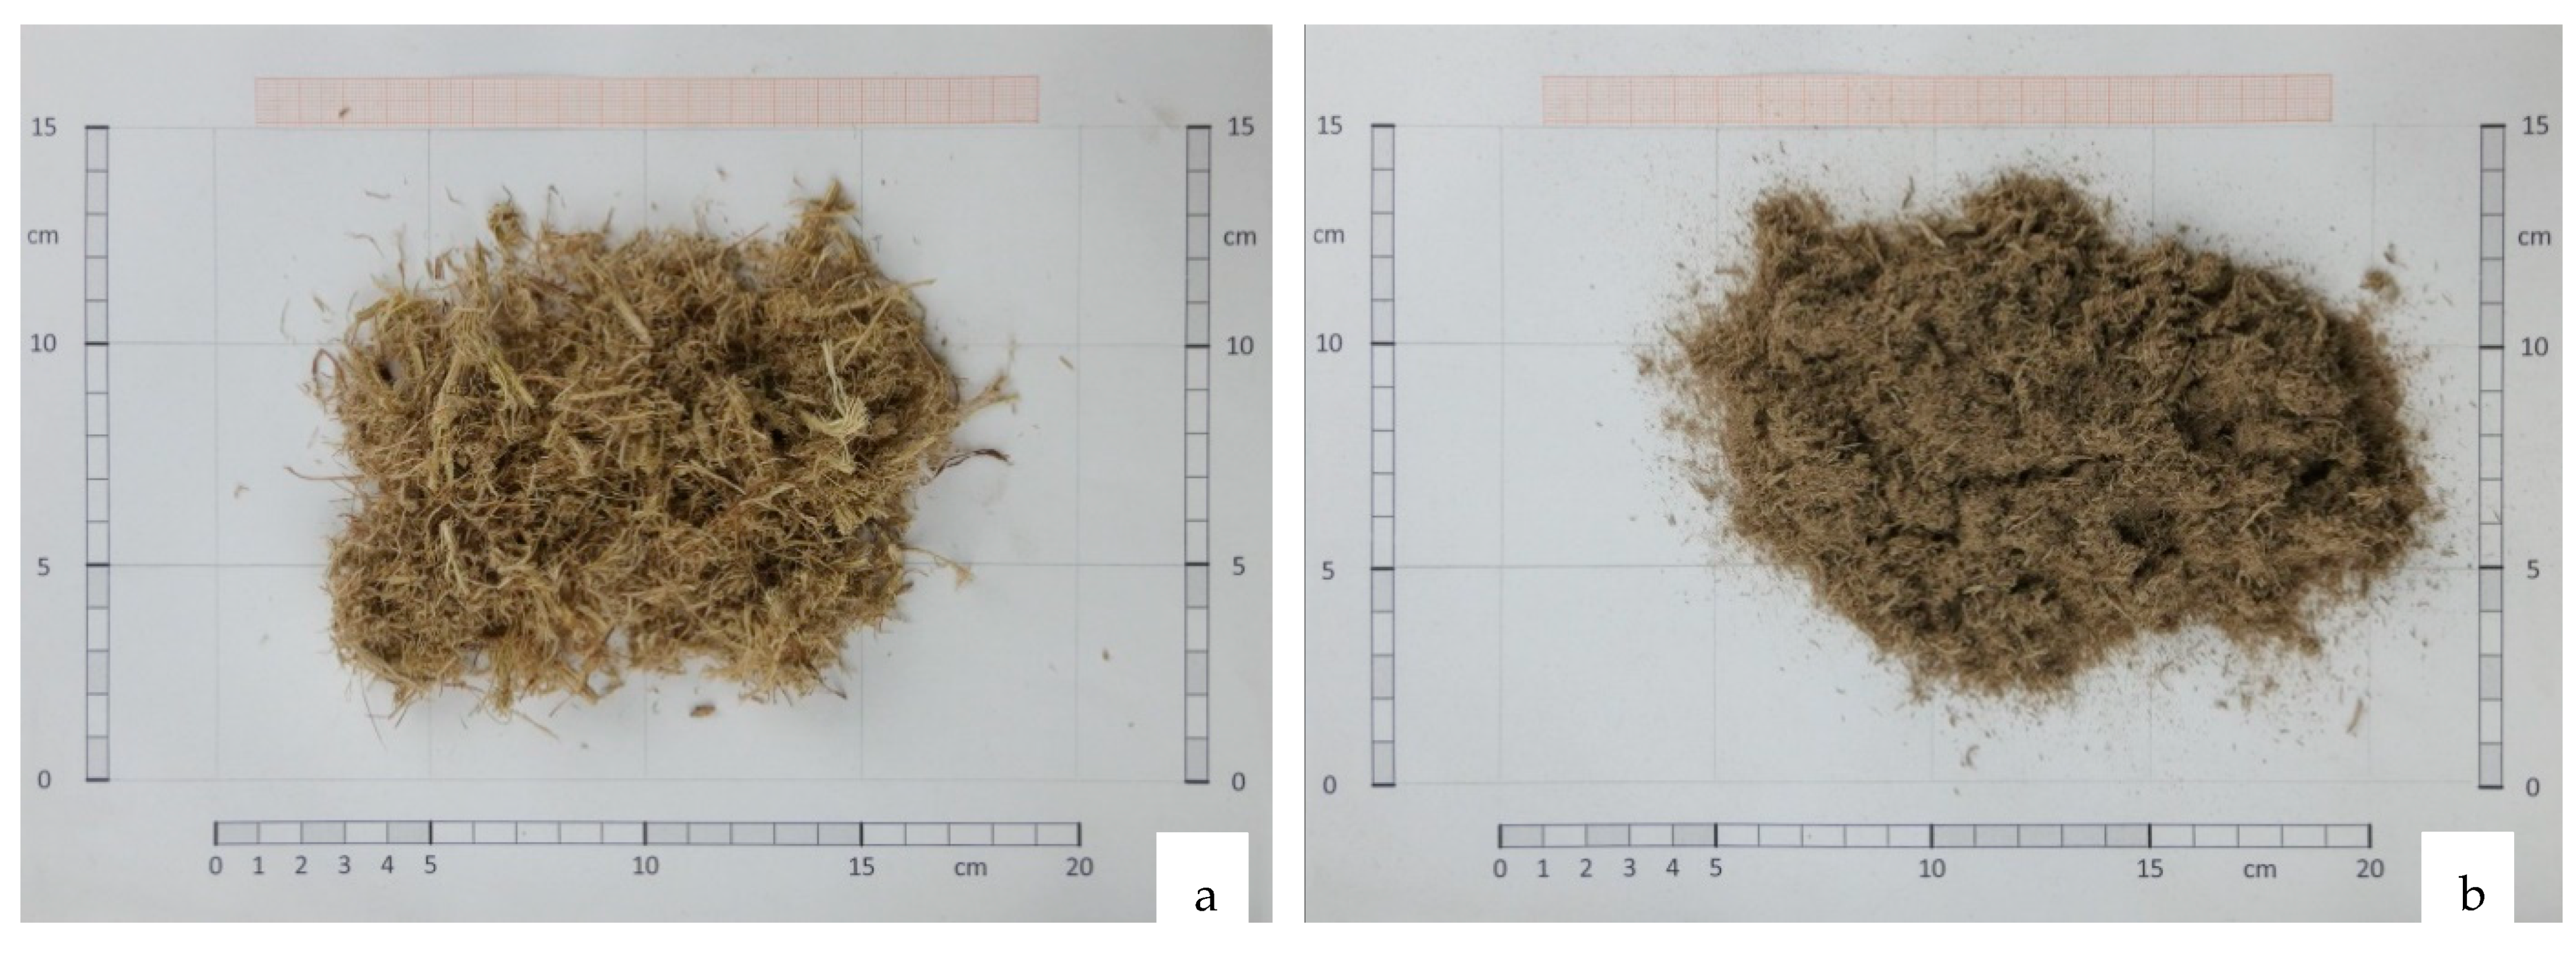 Agronomy | Free Full-Text | Extrusion of Different Plants into Fibre for  Peat Replacement in Growing Media: Adjustment of Parameters to Achieve  Satisfactory Physical Fibre-Properties | HTML